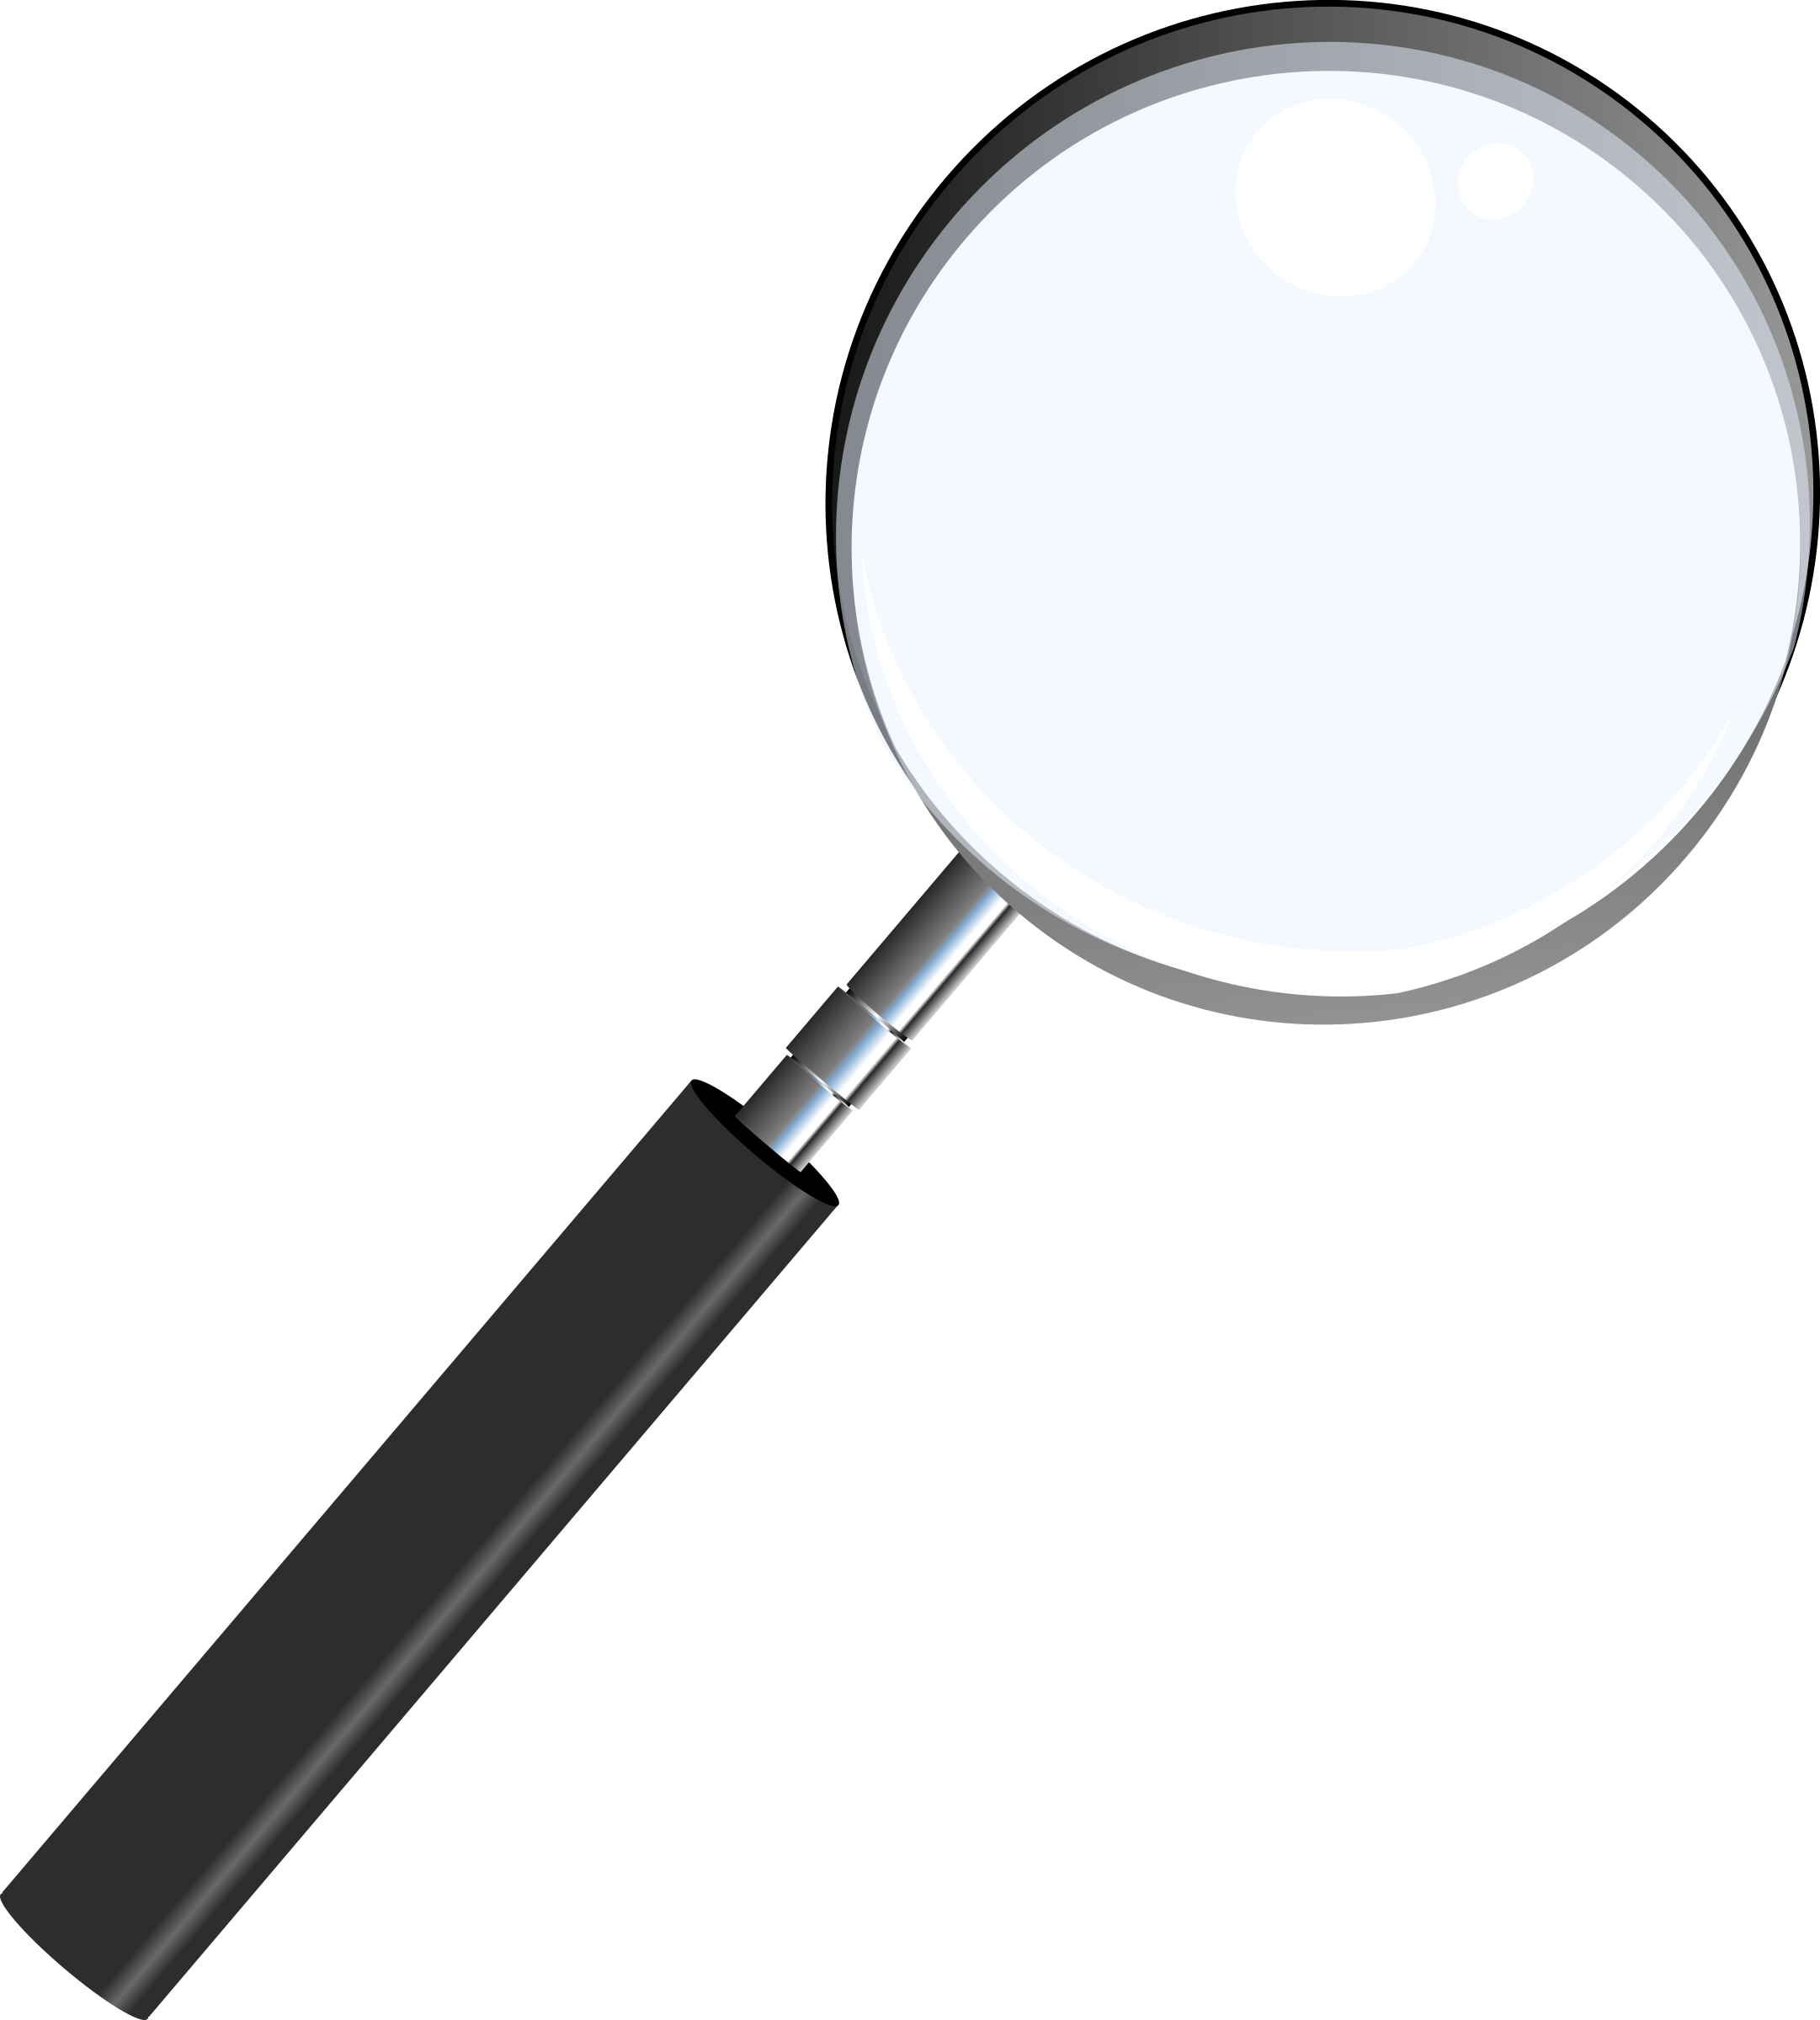 Magnifying Glass - Magnifying Glass Transparent Background (2162x2400)